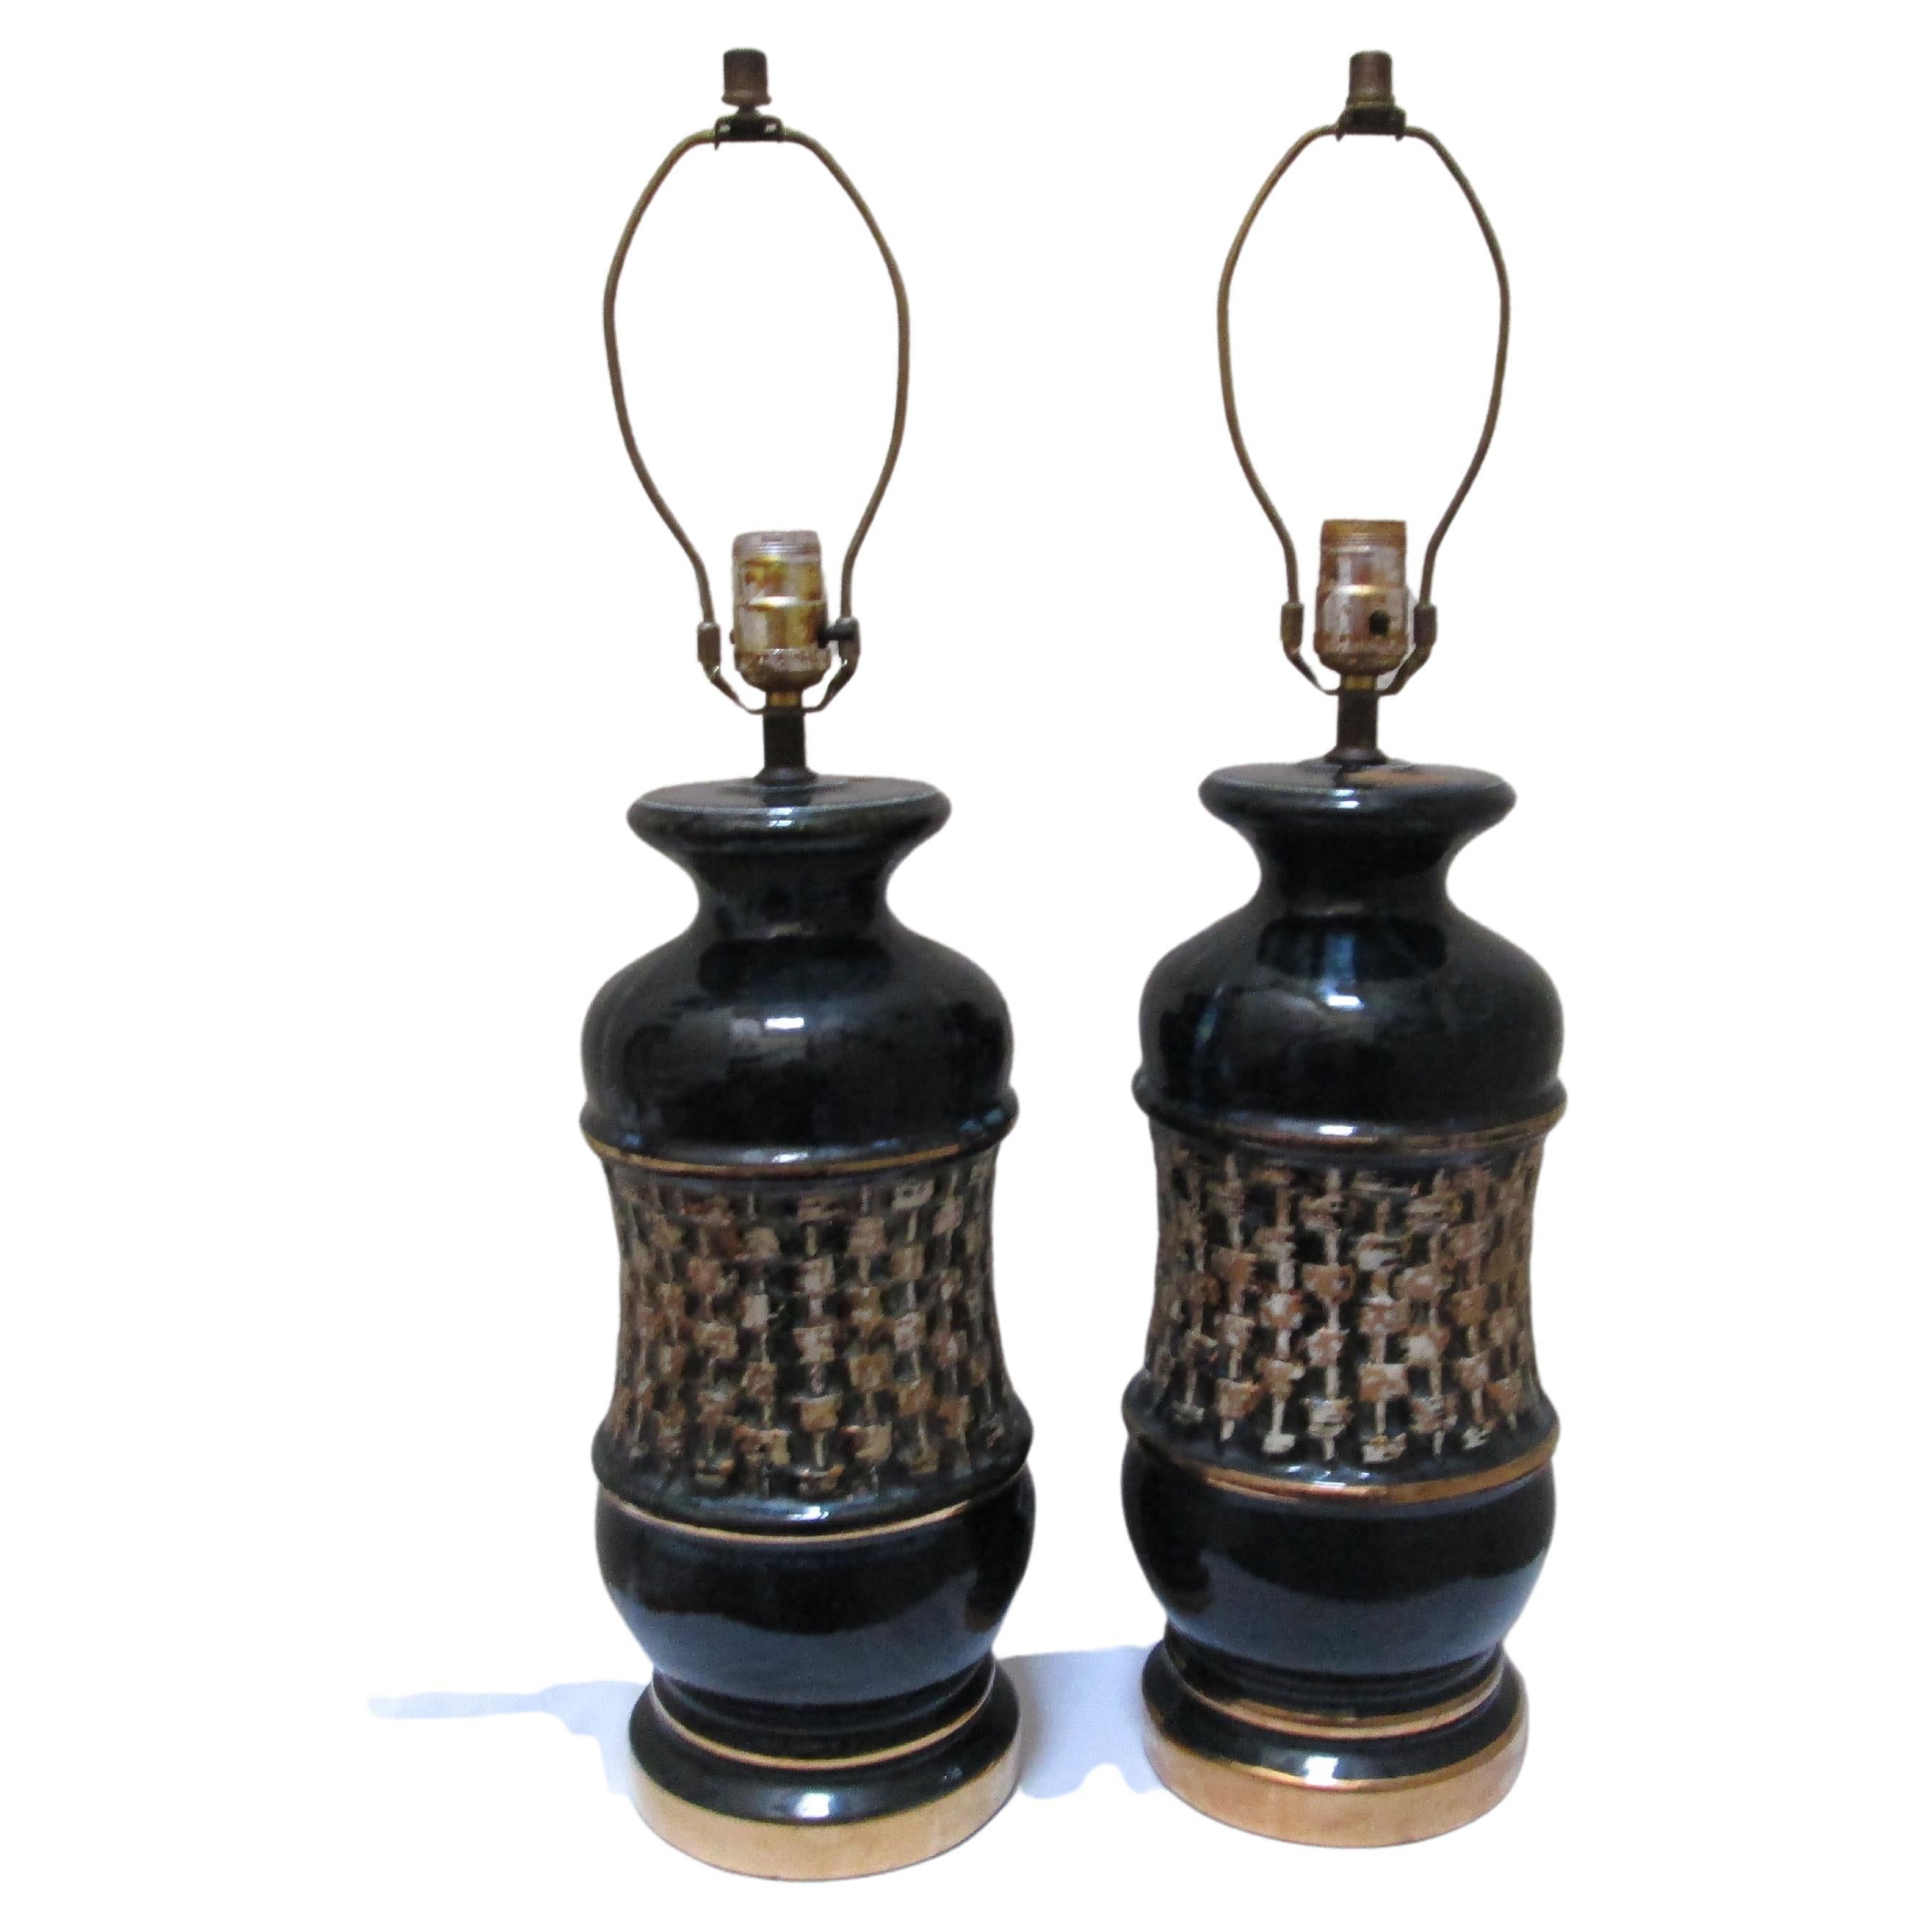 Iridescent Pair of Black and Gold Ceramic High Glaze Mid Century Table Lamps